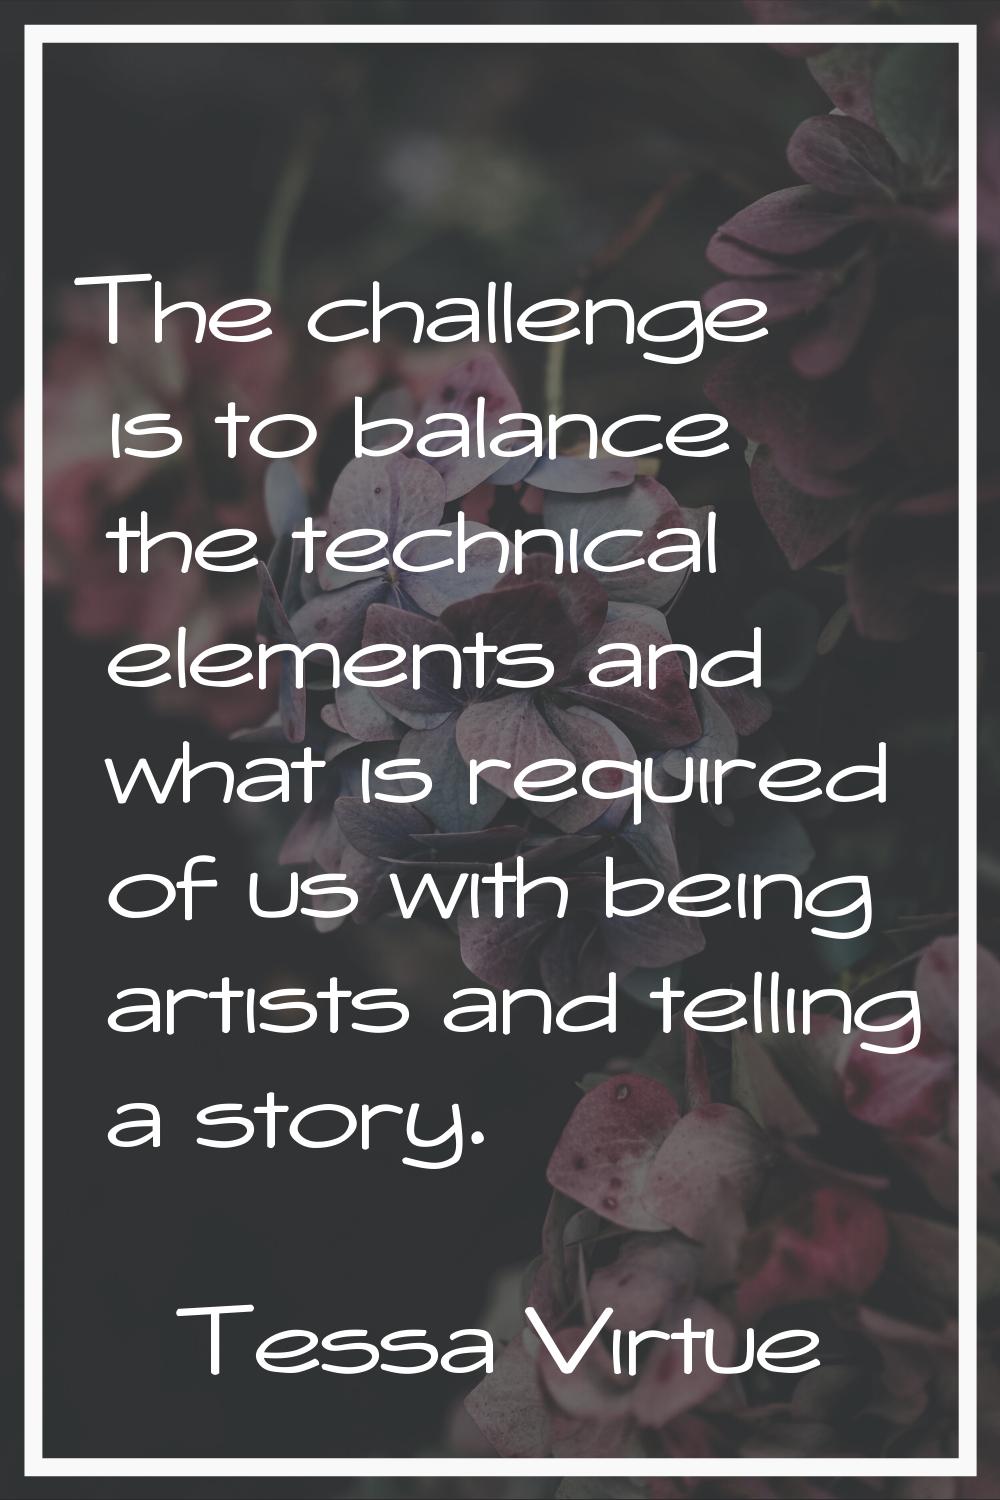 The challenge is to balance the technical elements and what is required of us with being artists an